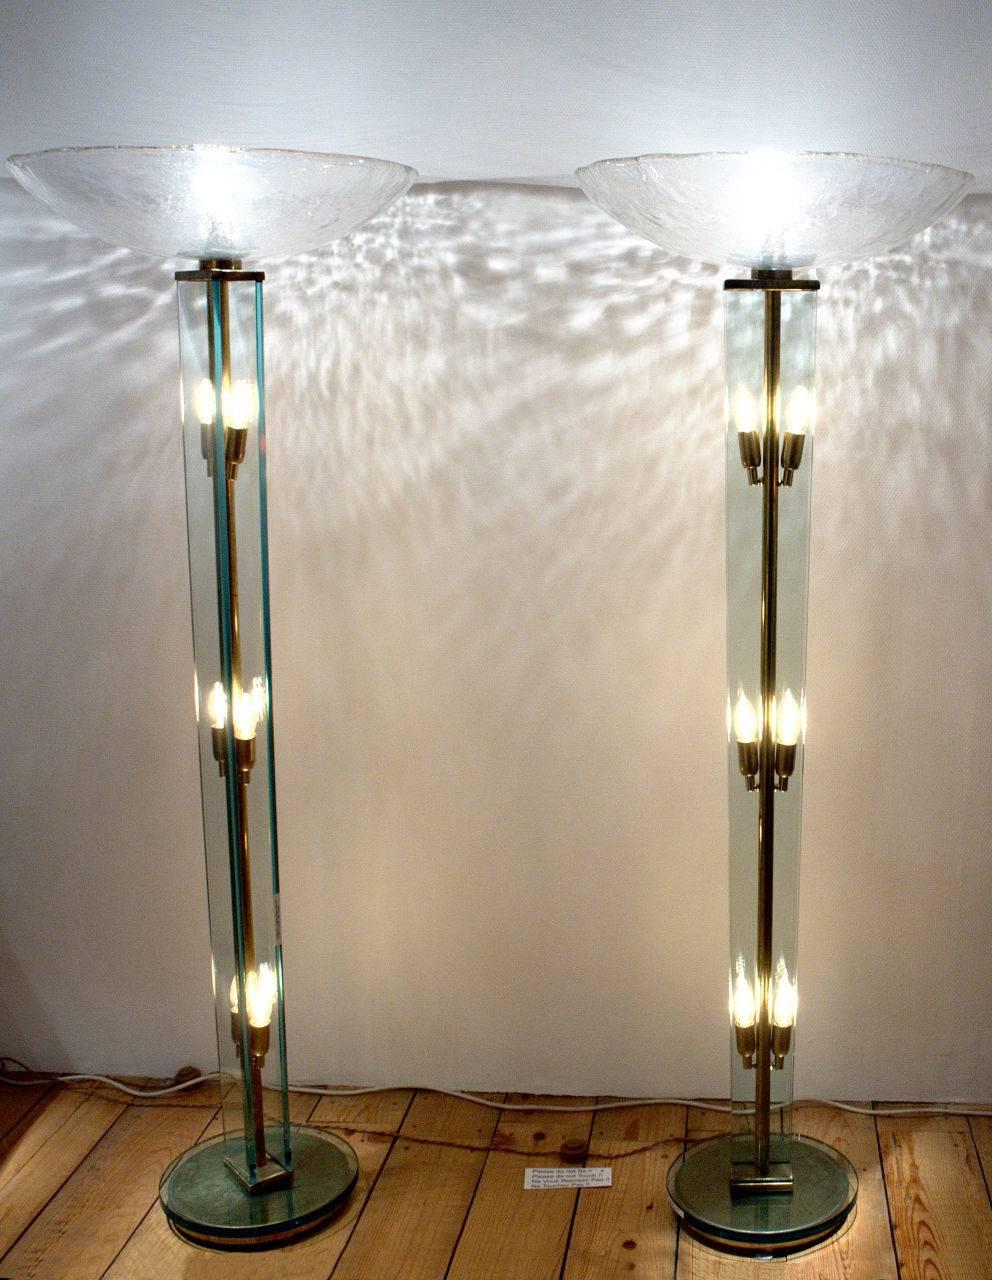 Pair of floor lamps in the style of Fontana Arte, Italy, circa 1960, in Perfect condition "No scratch".